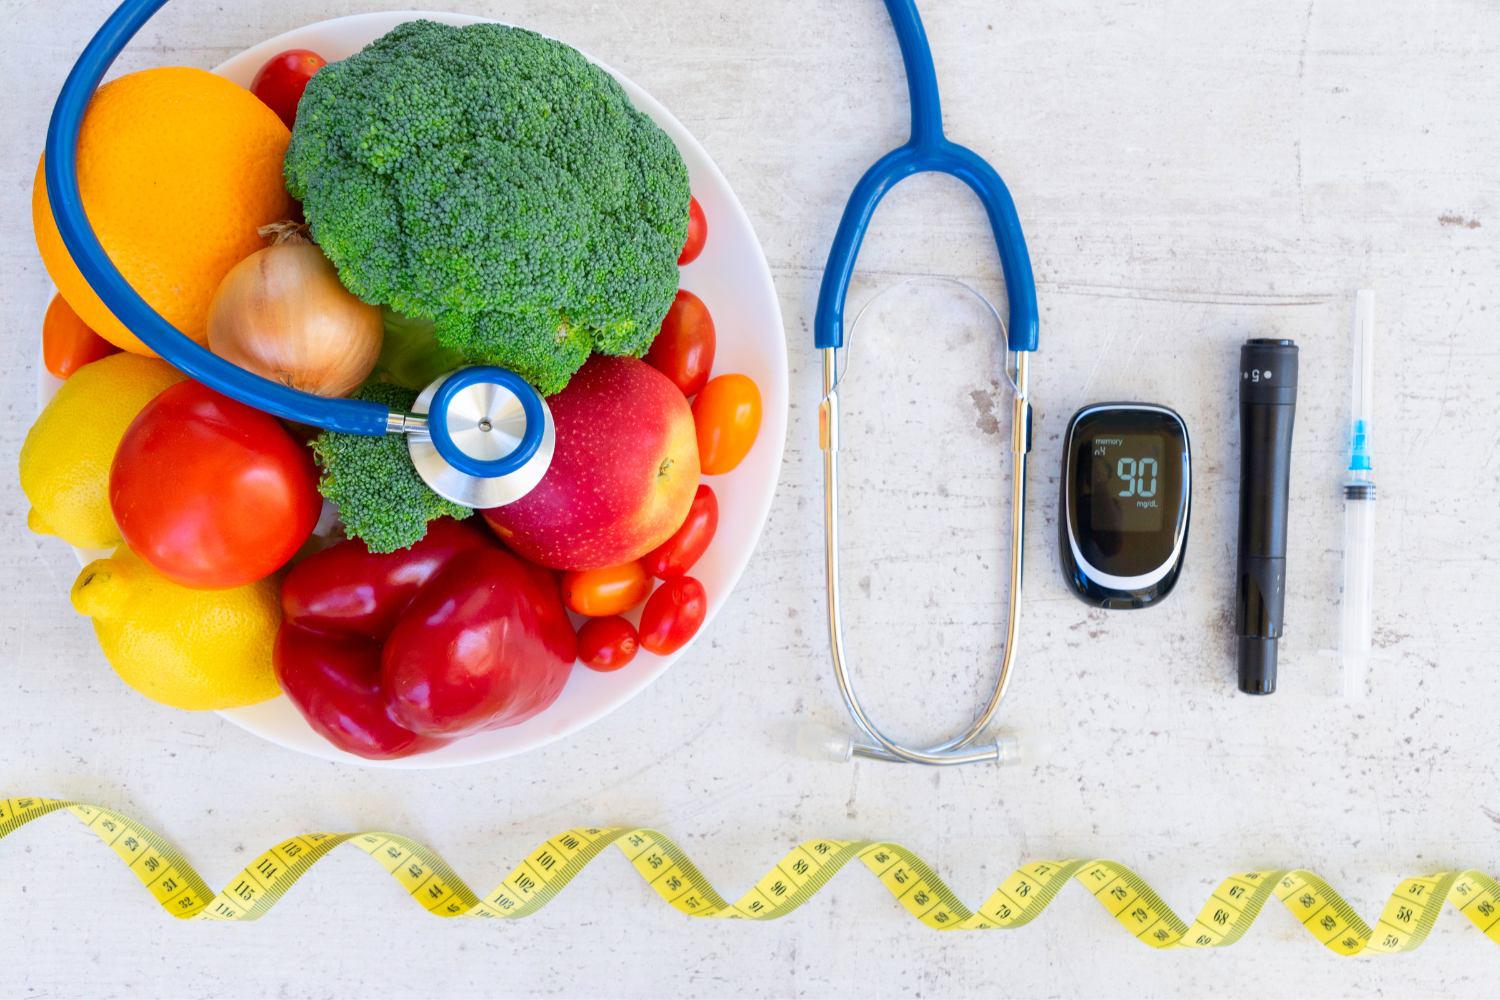 A plate of fruit and vegetables next to a stethoscope, blood sugar monitor, and other tools used for people with diabetes.